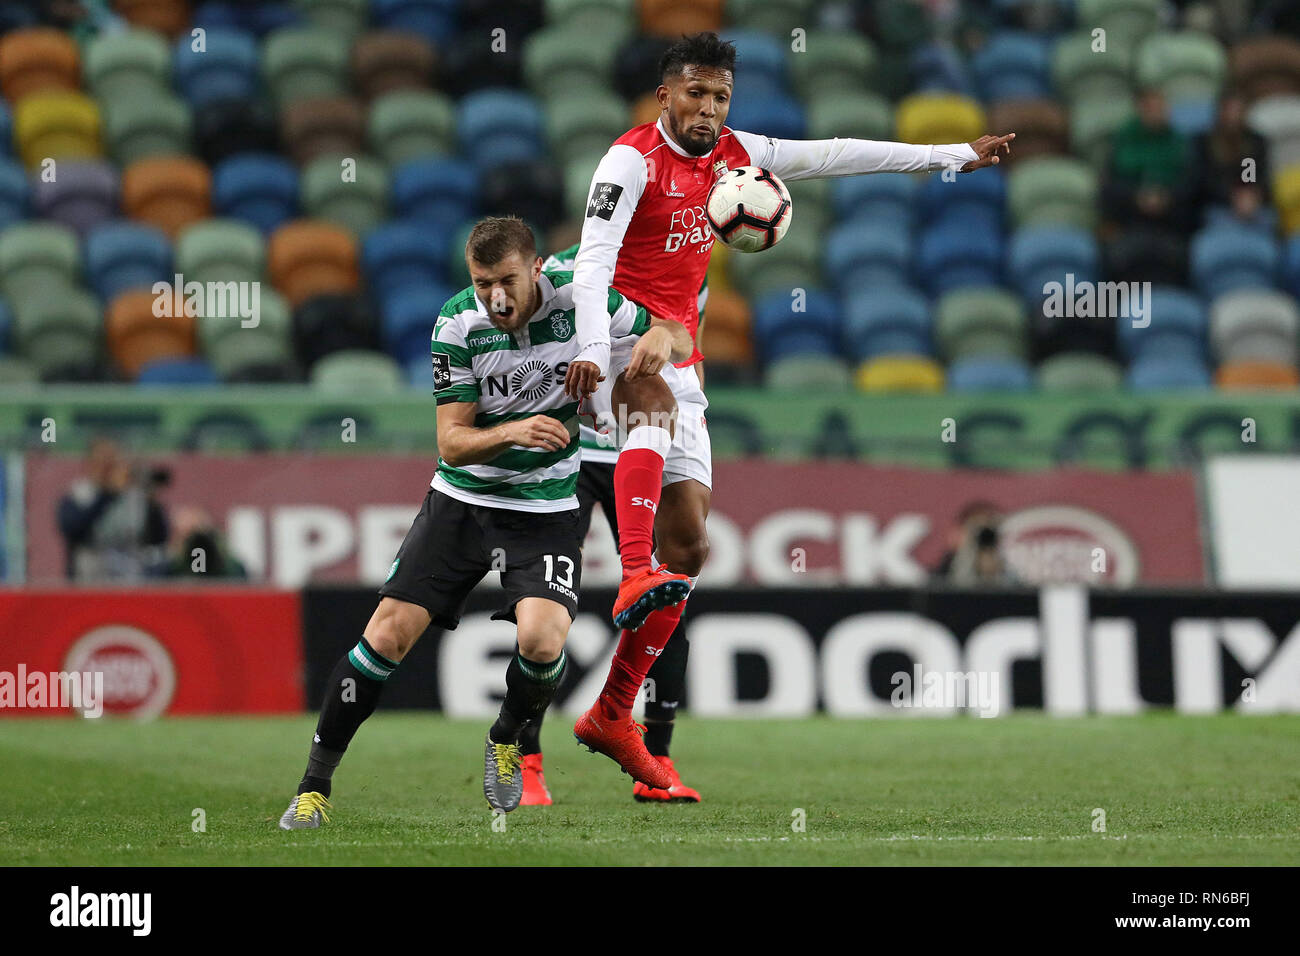 Lisbon, PORTUGAL, Portugal. 17th Feb, 2019. Stefan Ristovski of Sporting CP (L) vies for the ball with Dyego Sousa of SC Braga (R) during the League NOS 2018/19 footballl match between Sporting CP vs SC Braga. Credit: David Martins/SOPA Images/ZUMA Wire/Alamy Live News Stock Photo